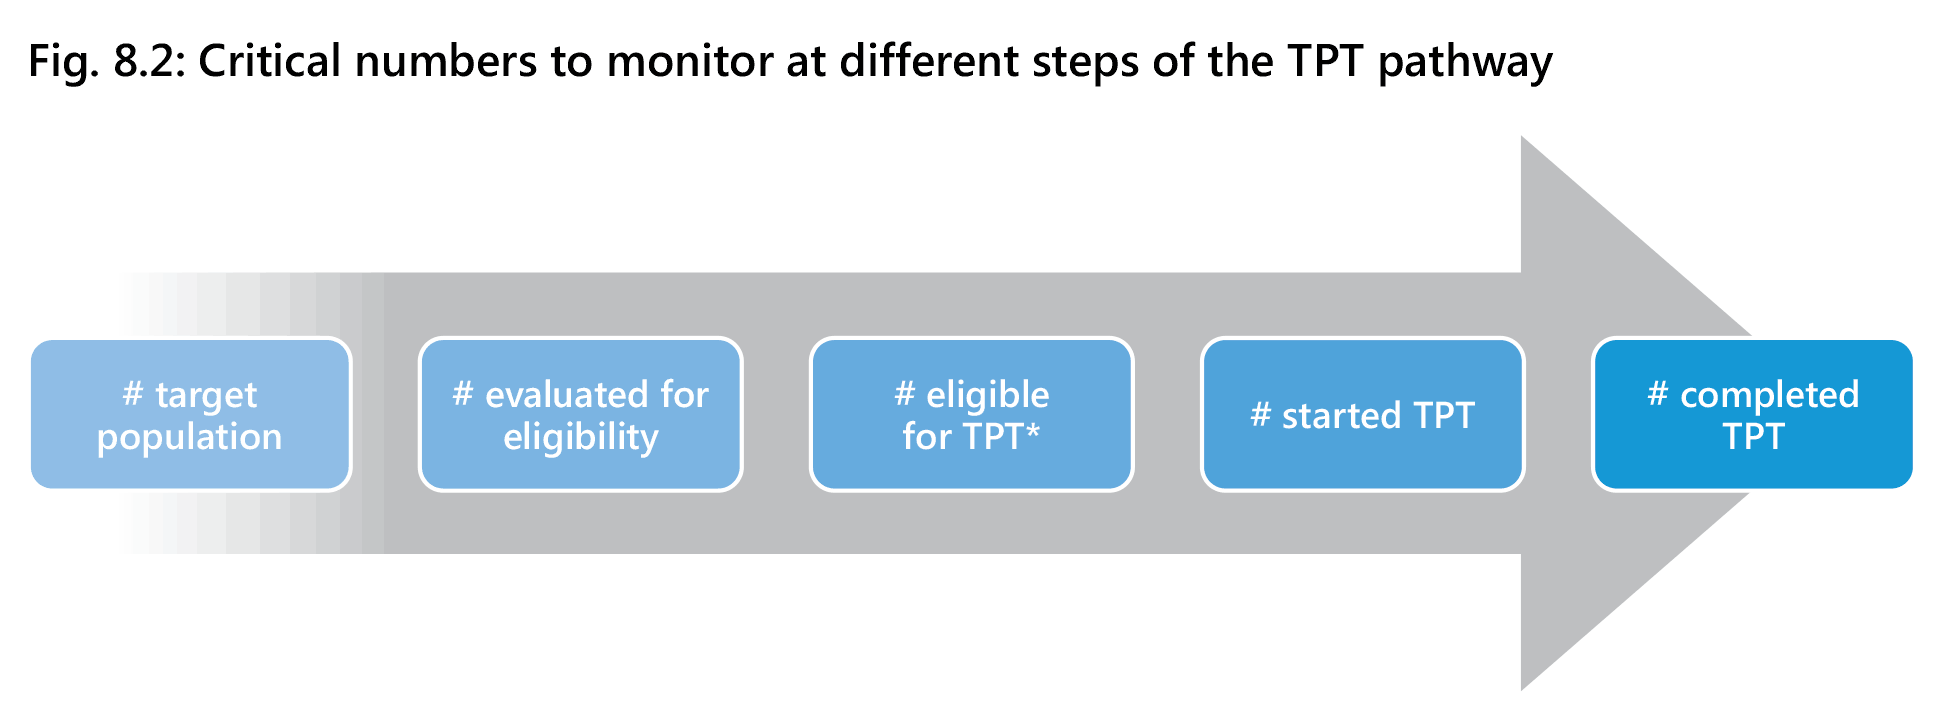 Critical numbers to monitor at different steps of the TPT pathway